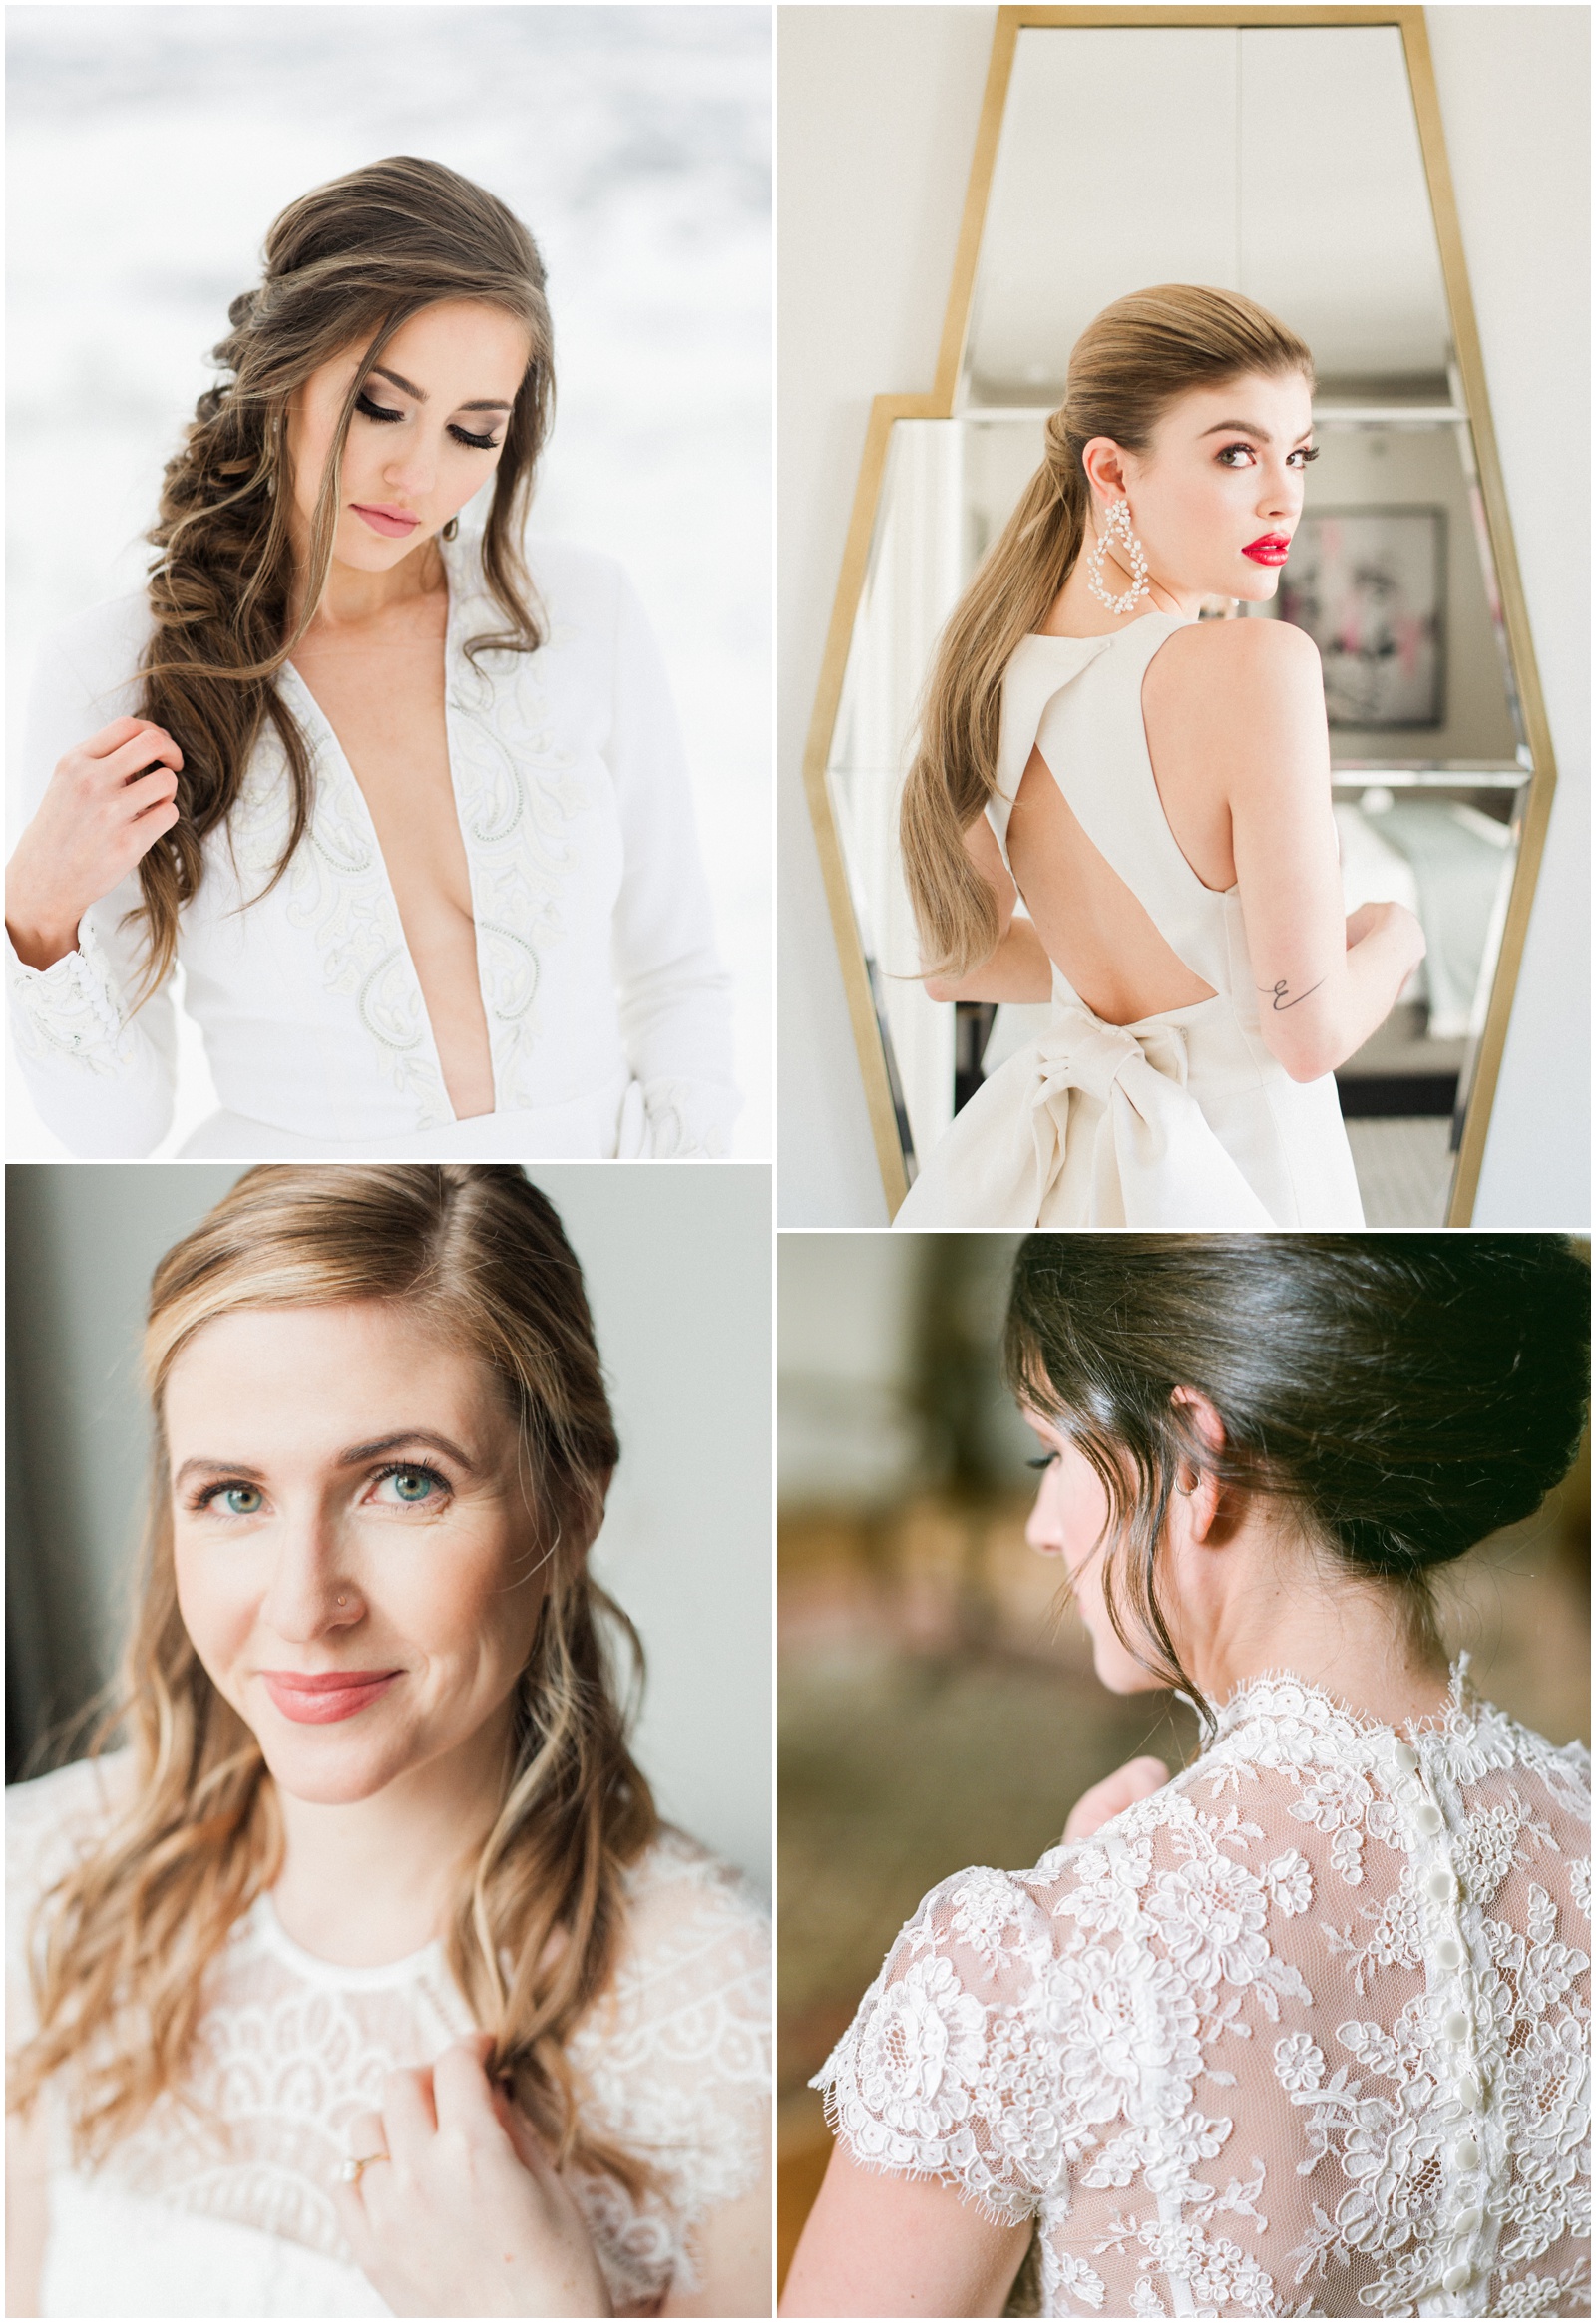 5 tips for a memorable microwedding - get your hair and makeup professionally done